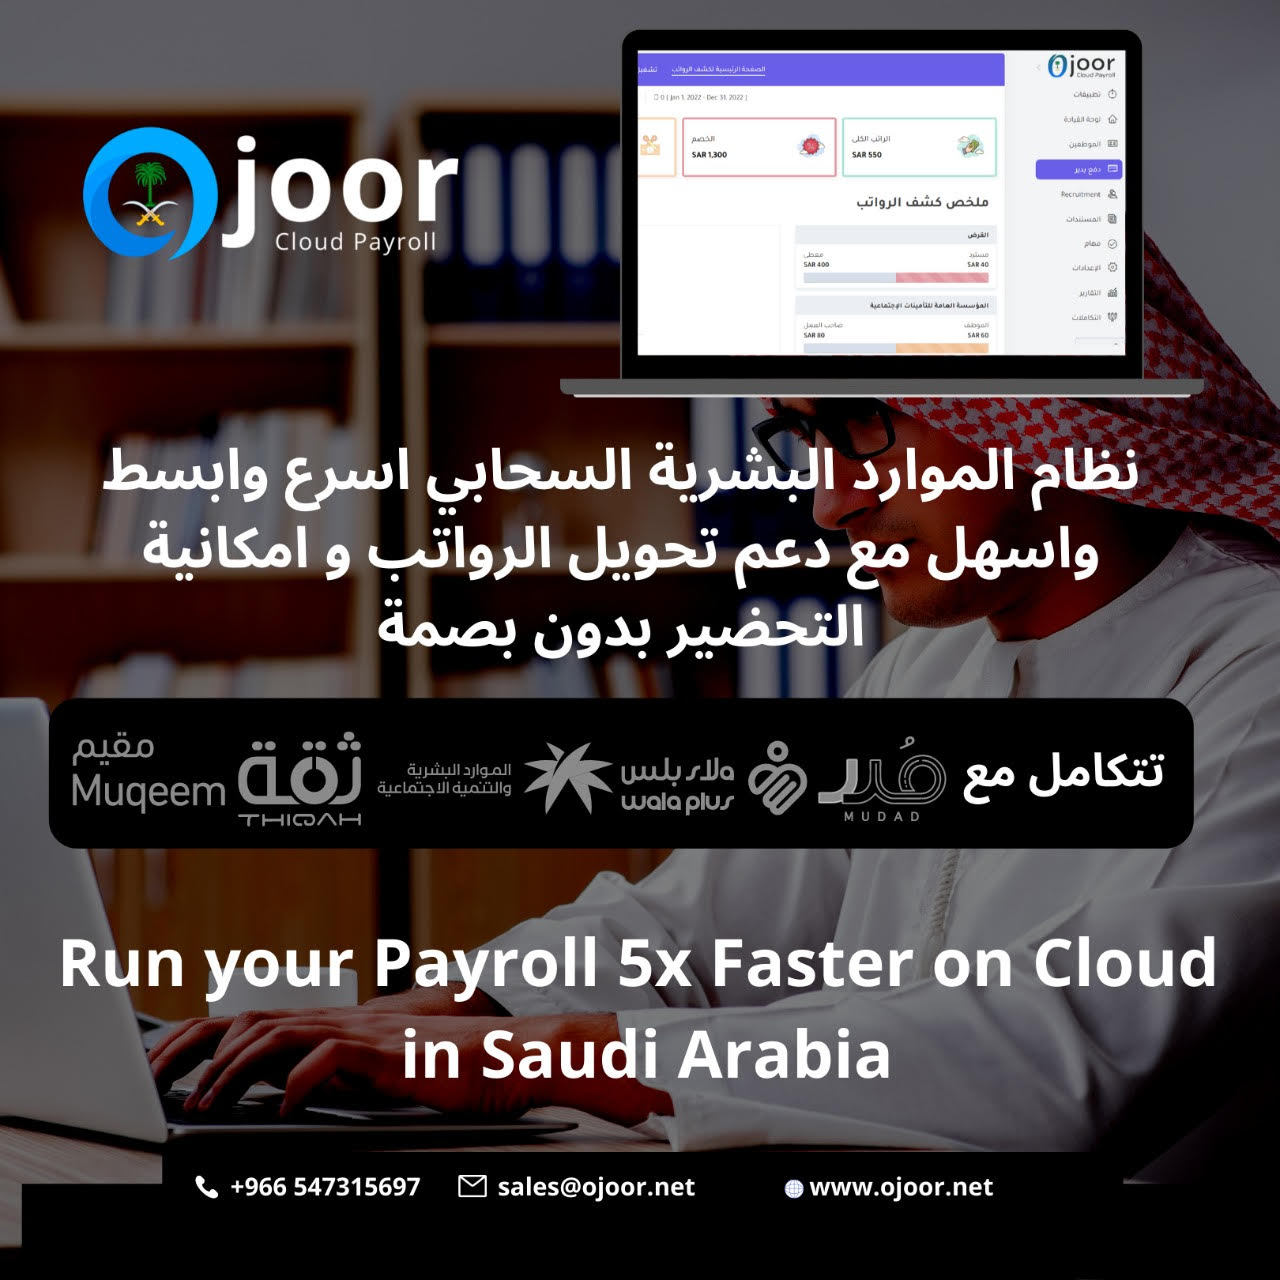 How to ensure accuracy of data in Payroll System in Saudi Arabia?